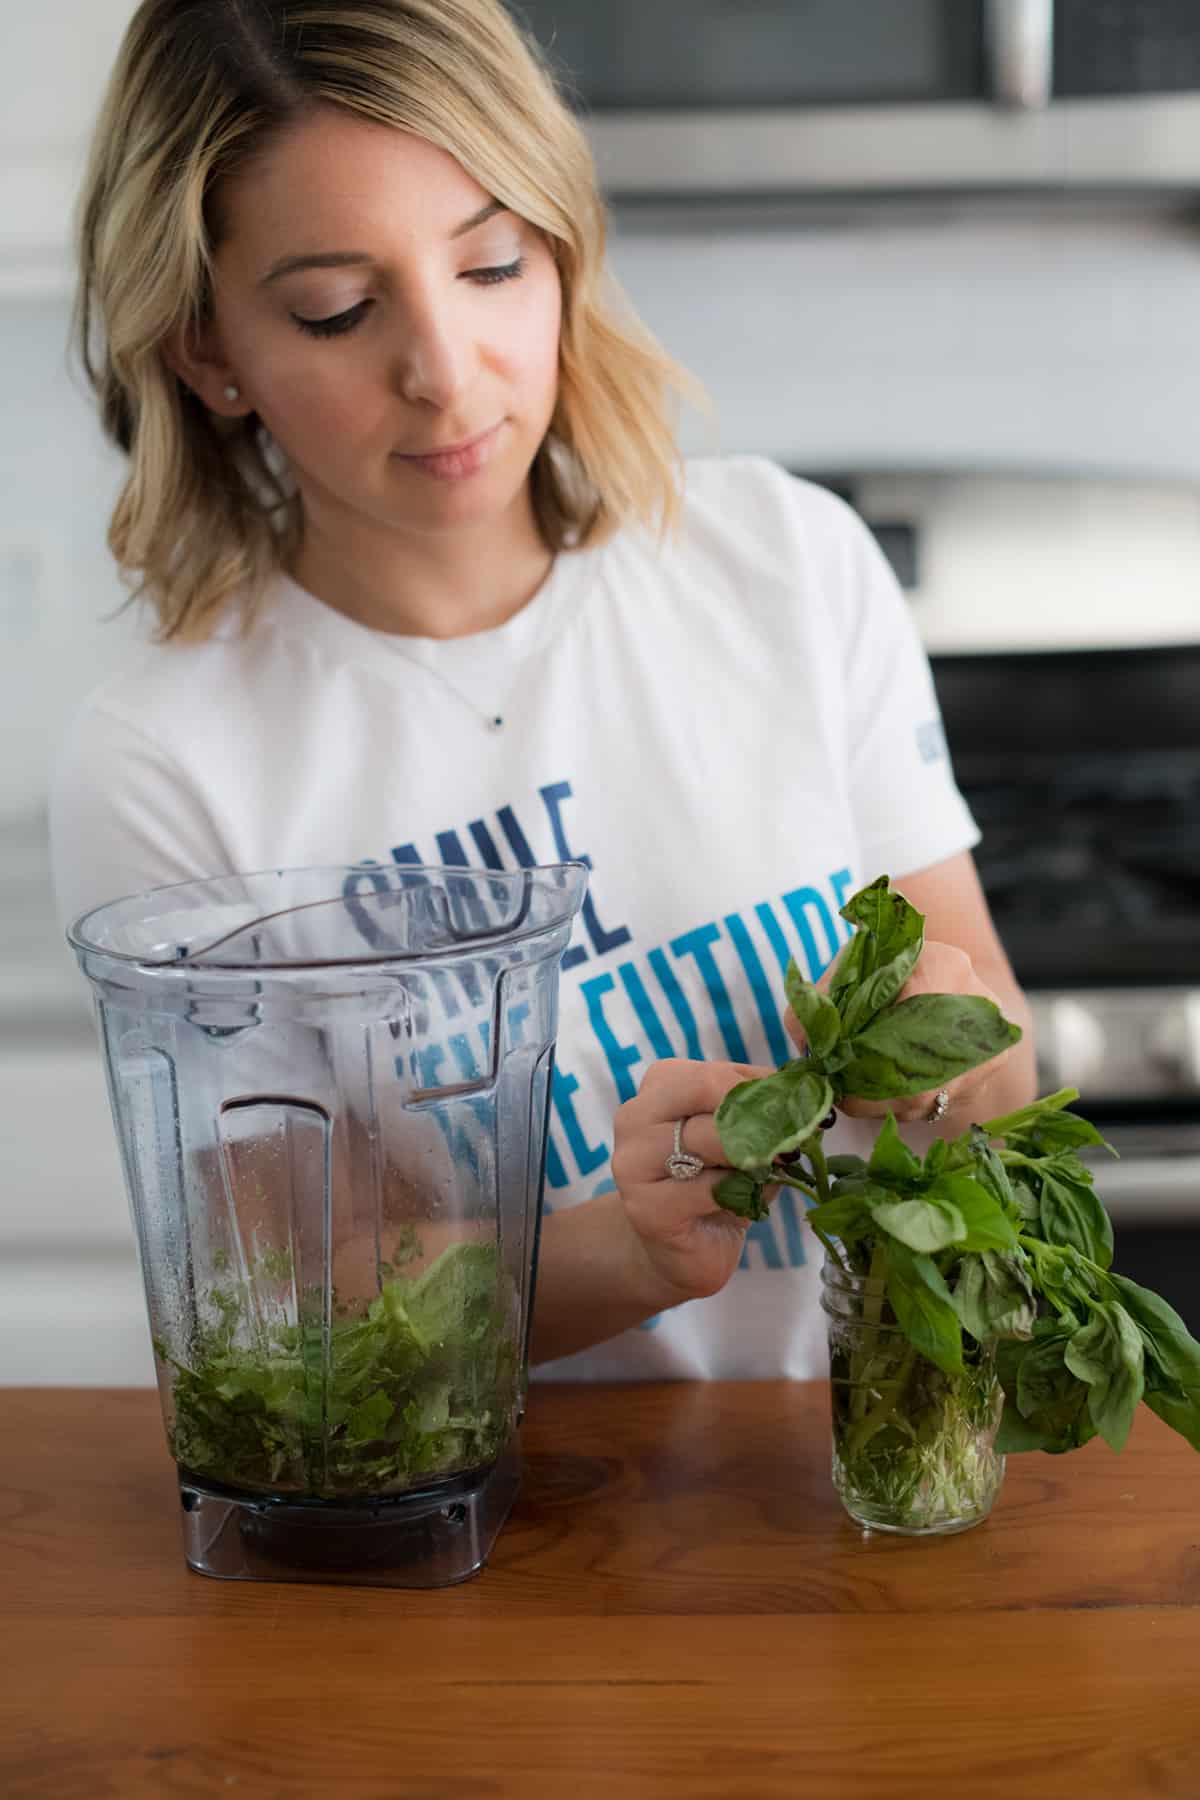 Showing how to preserve fresh herbs